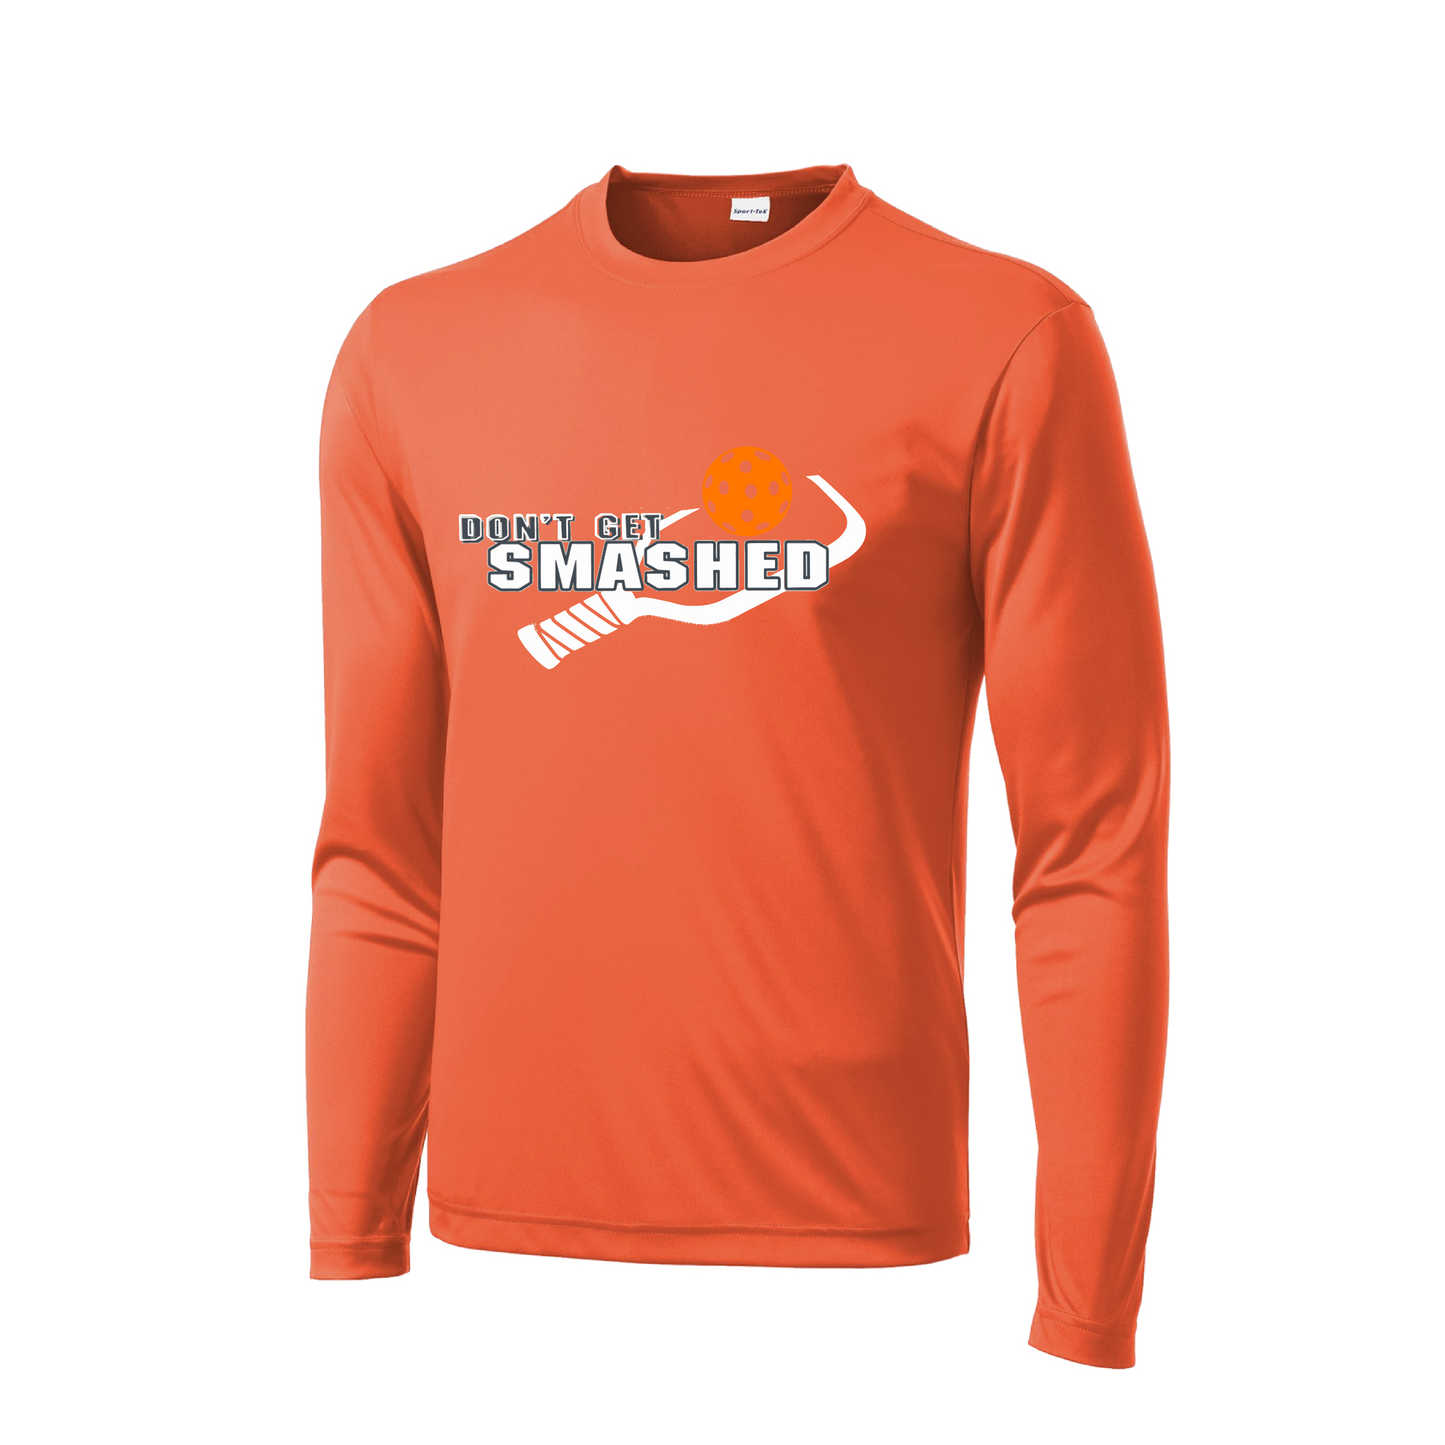 This lightweight, roomy and highly breathable Men's long-sleeved shirt is an athletic performance must-have! Boasting PosiCharge technology to keep your colors vibrant and logo looking new, it also has a removable tag and set-in sleeves for unbeatable comfort. Pickleball colors include cyan, orange, or pink.